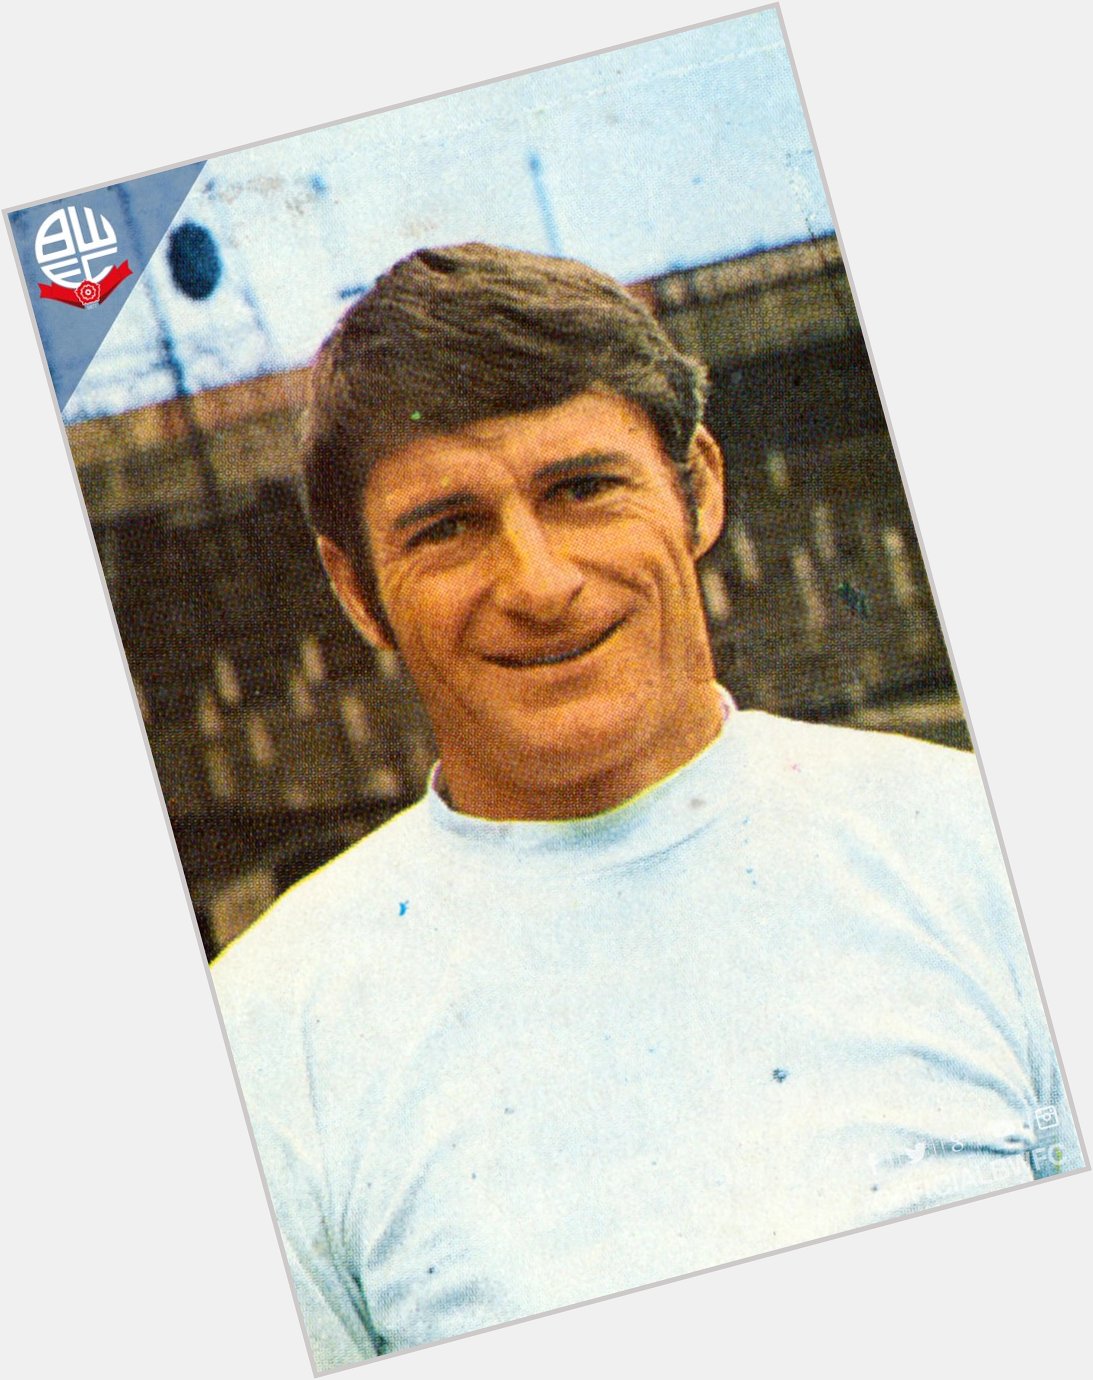 Many happy returns to former and England striker Roger Hunt who celebrates his 77th birthday today! 